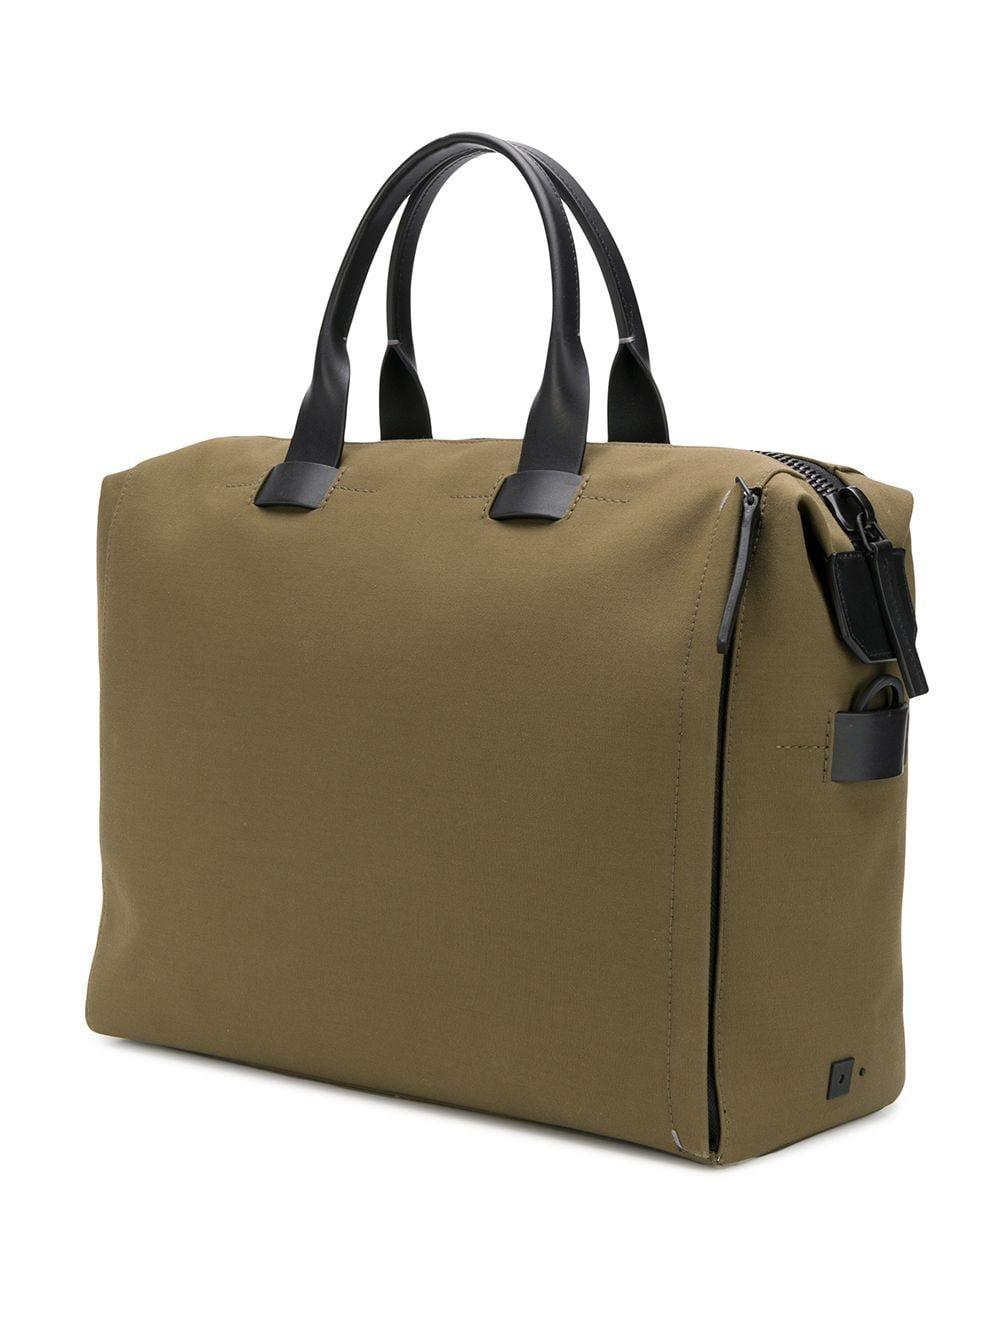 Troubadour Leather Top Handle Holdall Bag in Green for Men - Lyst